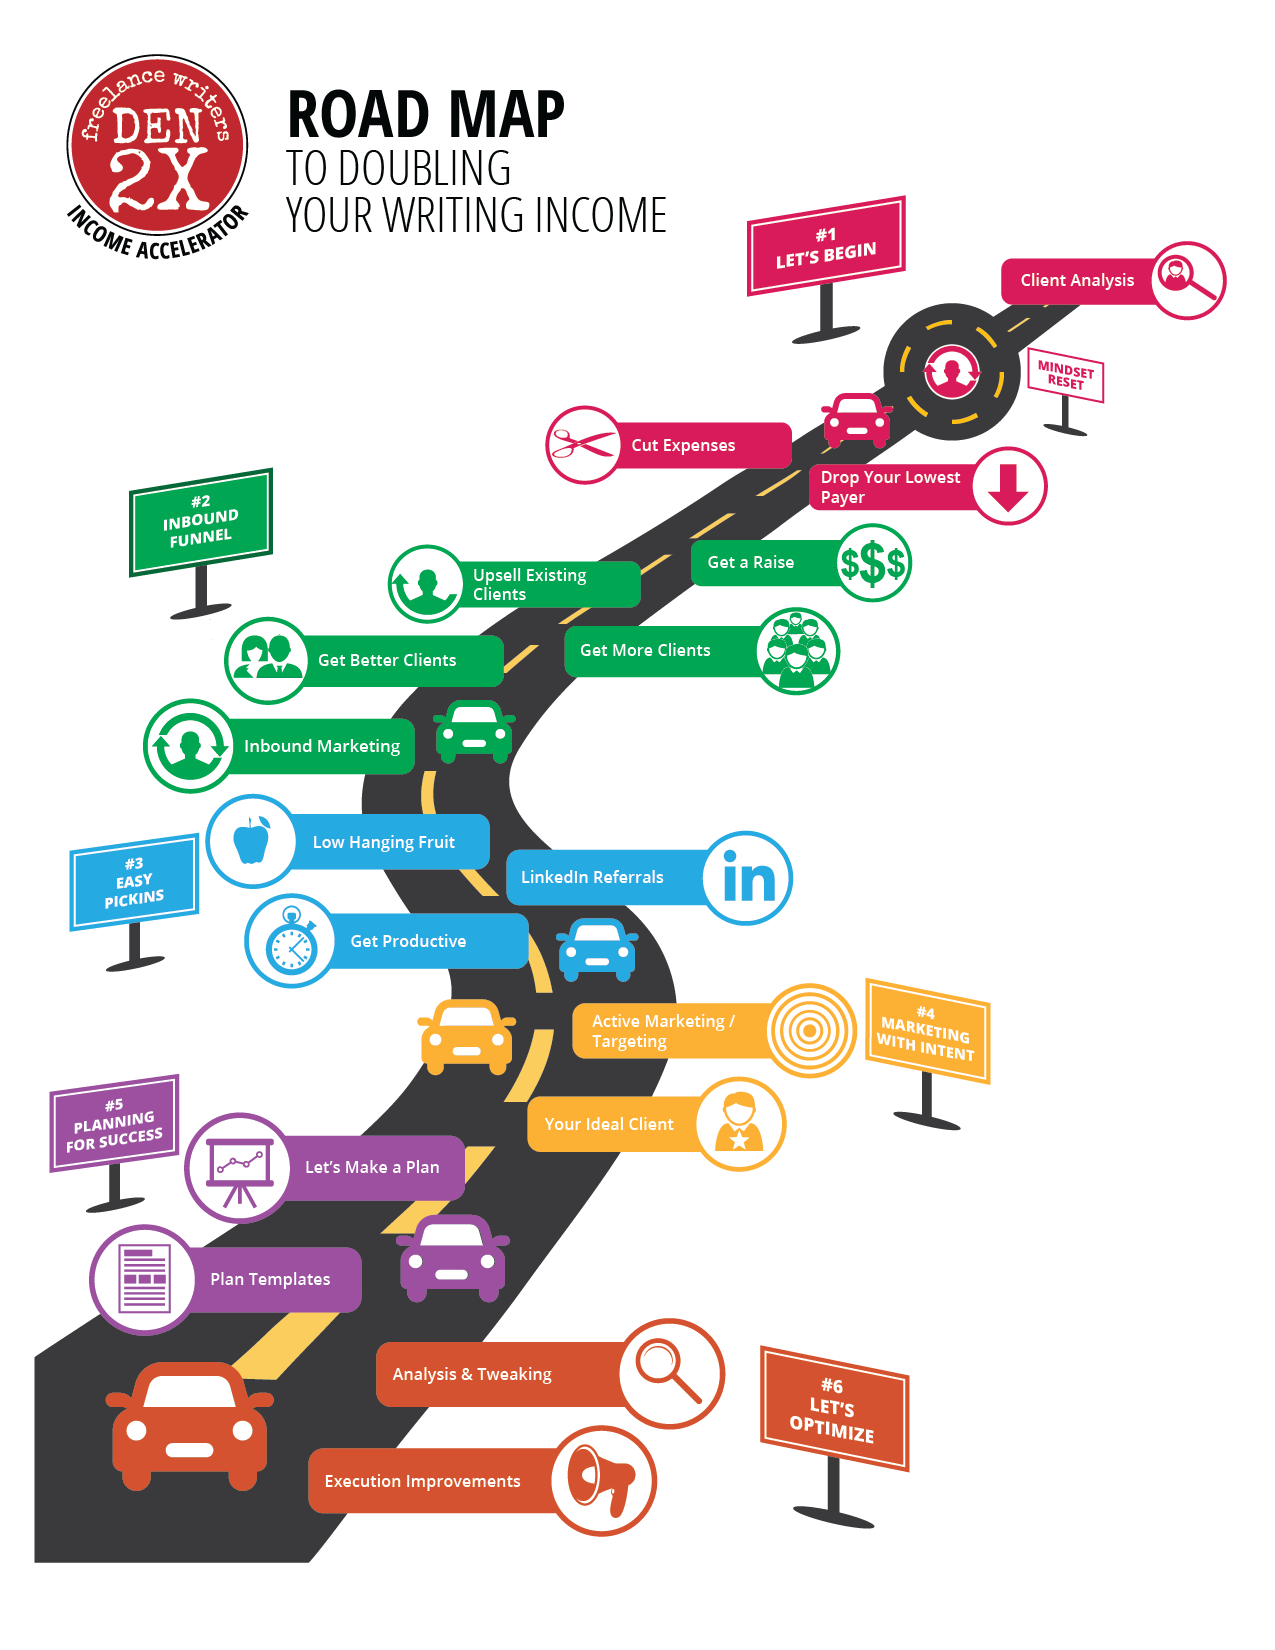 Freelance Writers Den 2X Road Map to Doubling Your Income